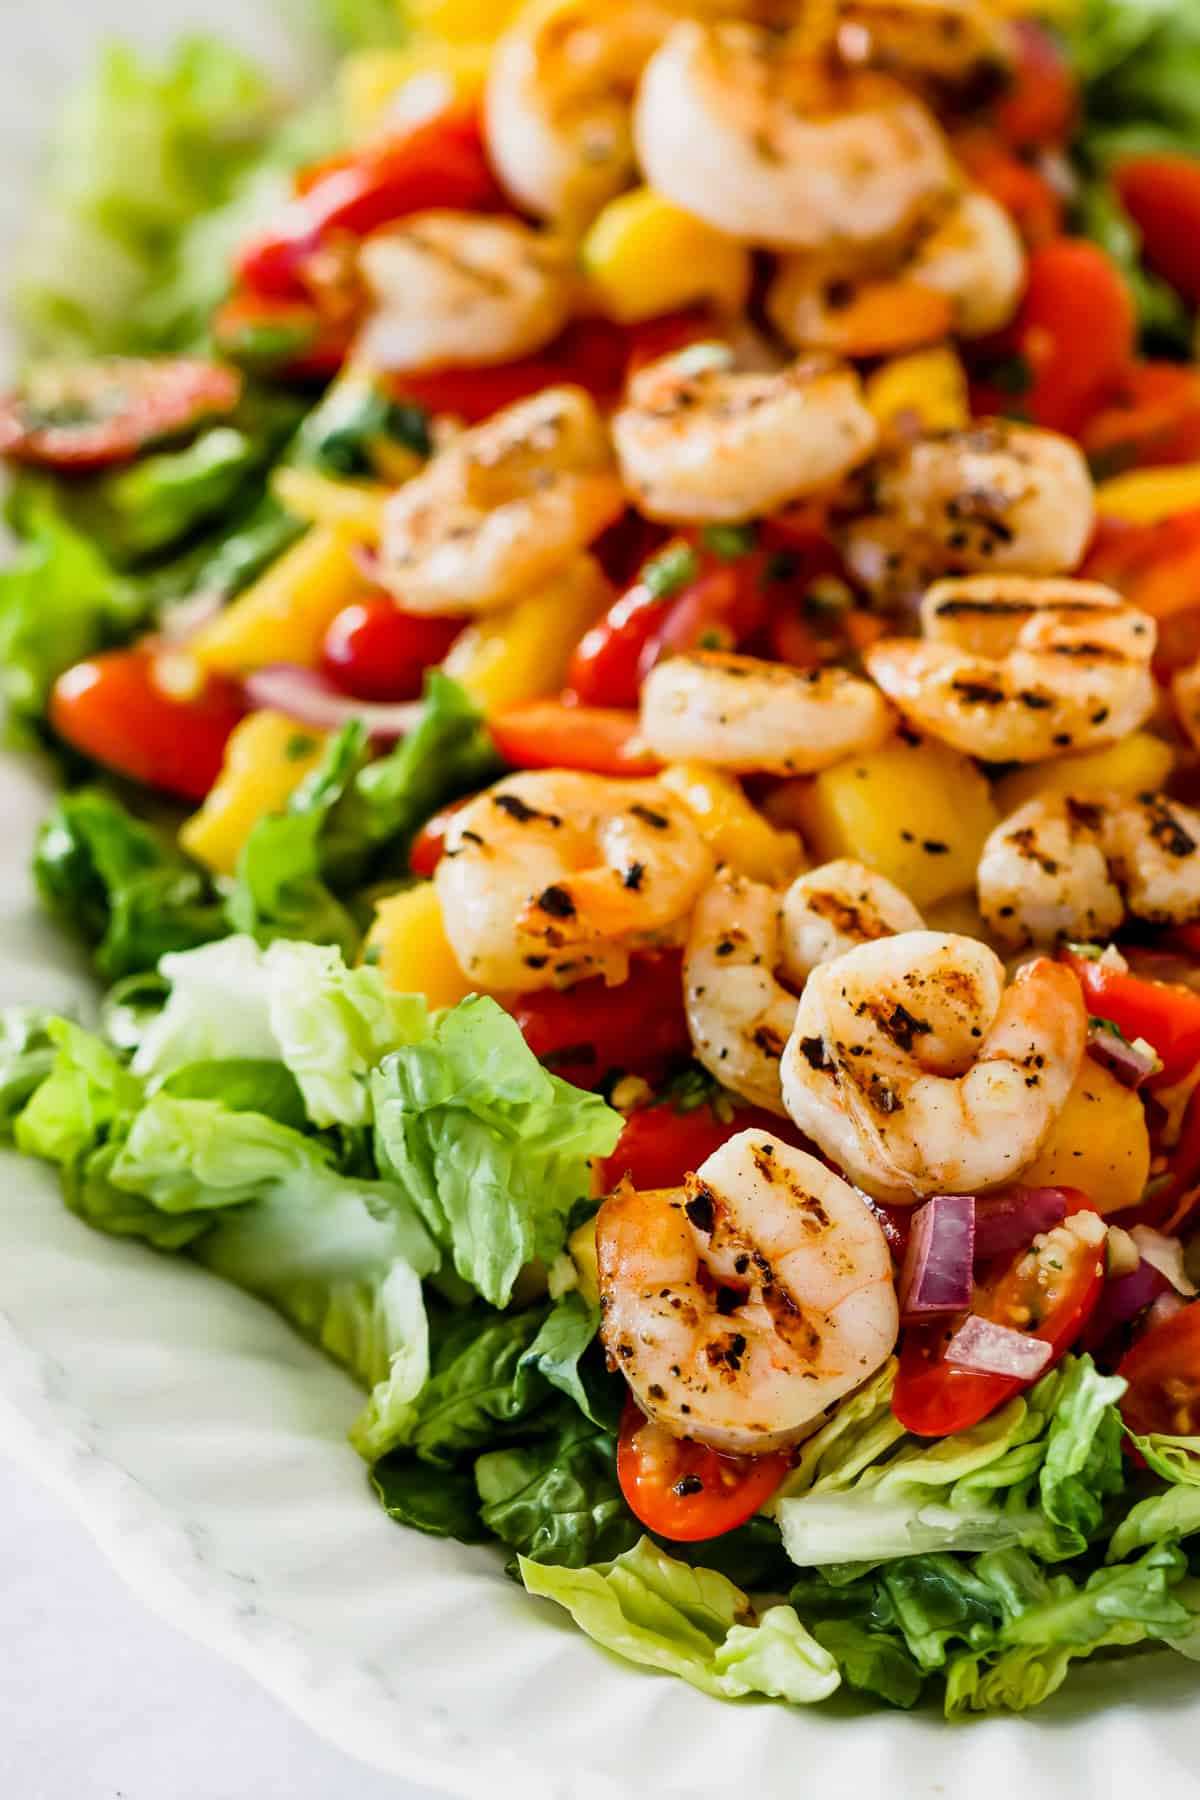 Close up of shrimp, mangoes, and cherry tomatoes arranged over salad greens.